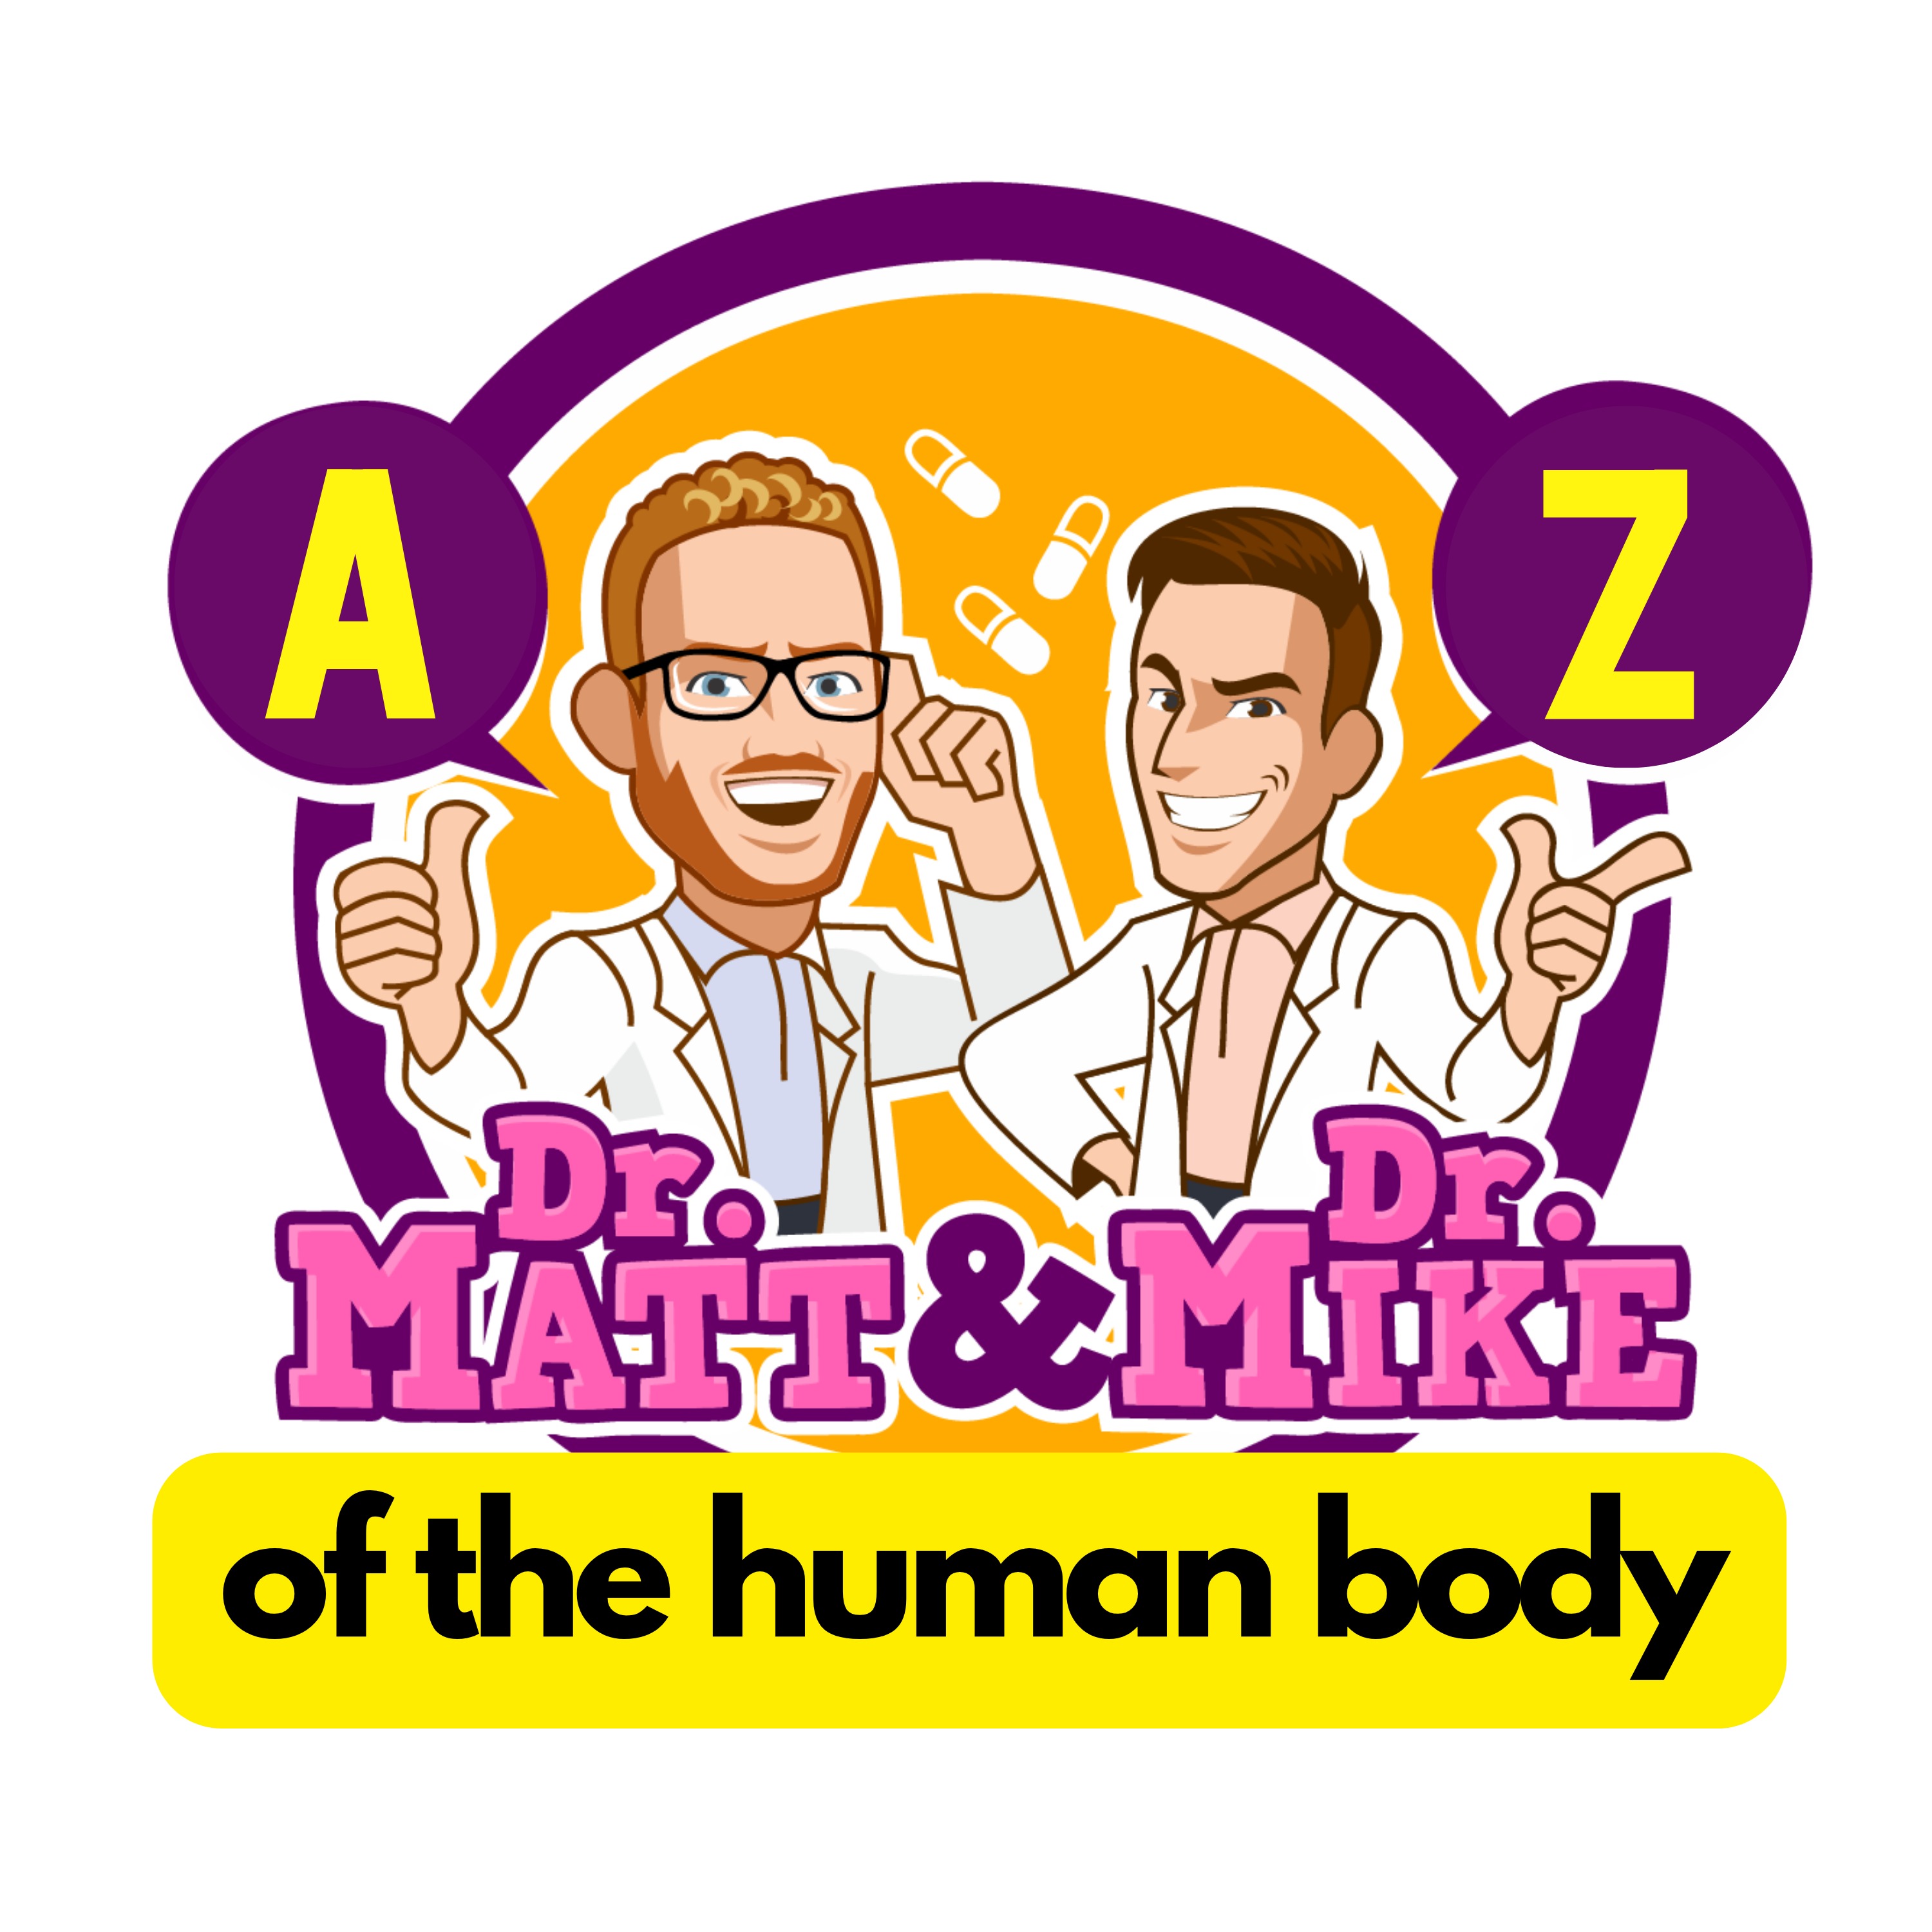 Angiotensin Converting Enzyme (ACE) | A-Z of the Human Body